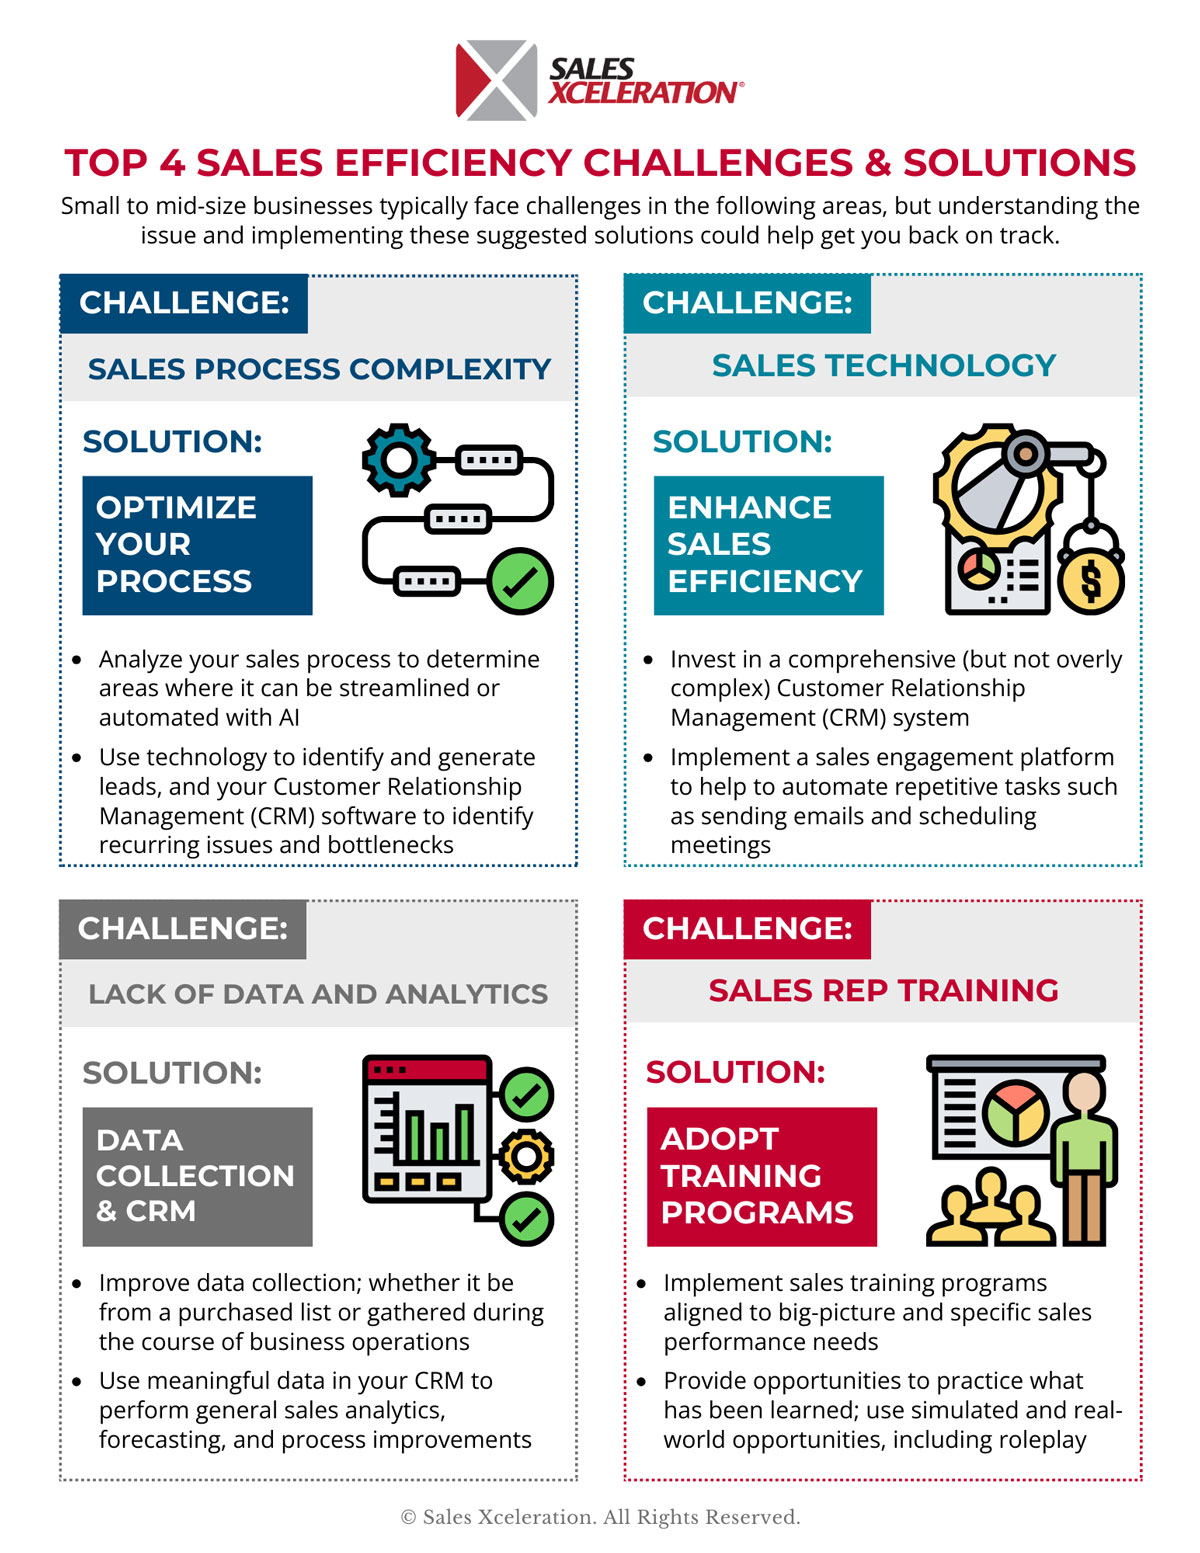 Graphic showcasing Top 4 Sales Efficiency Challenges and Solutions including sales process complexity, sales technology, lack of data and analytics, and sales rep training.